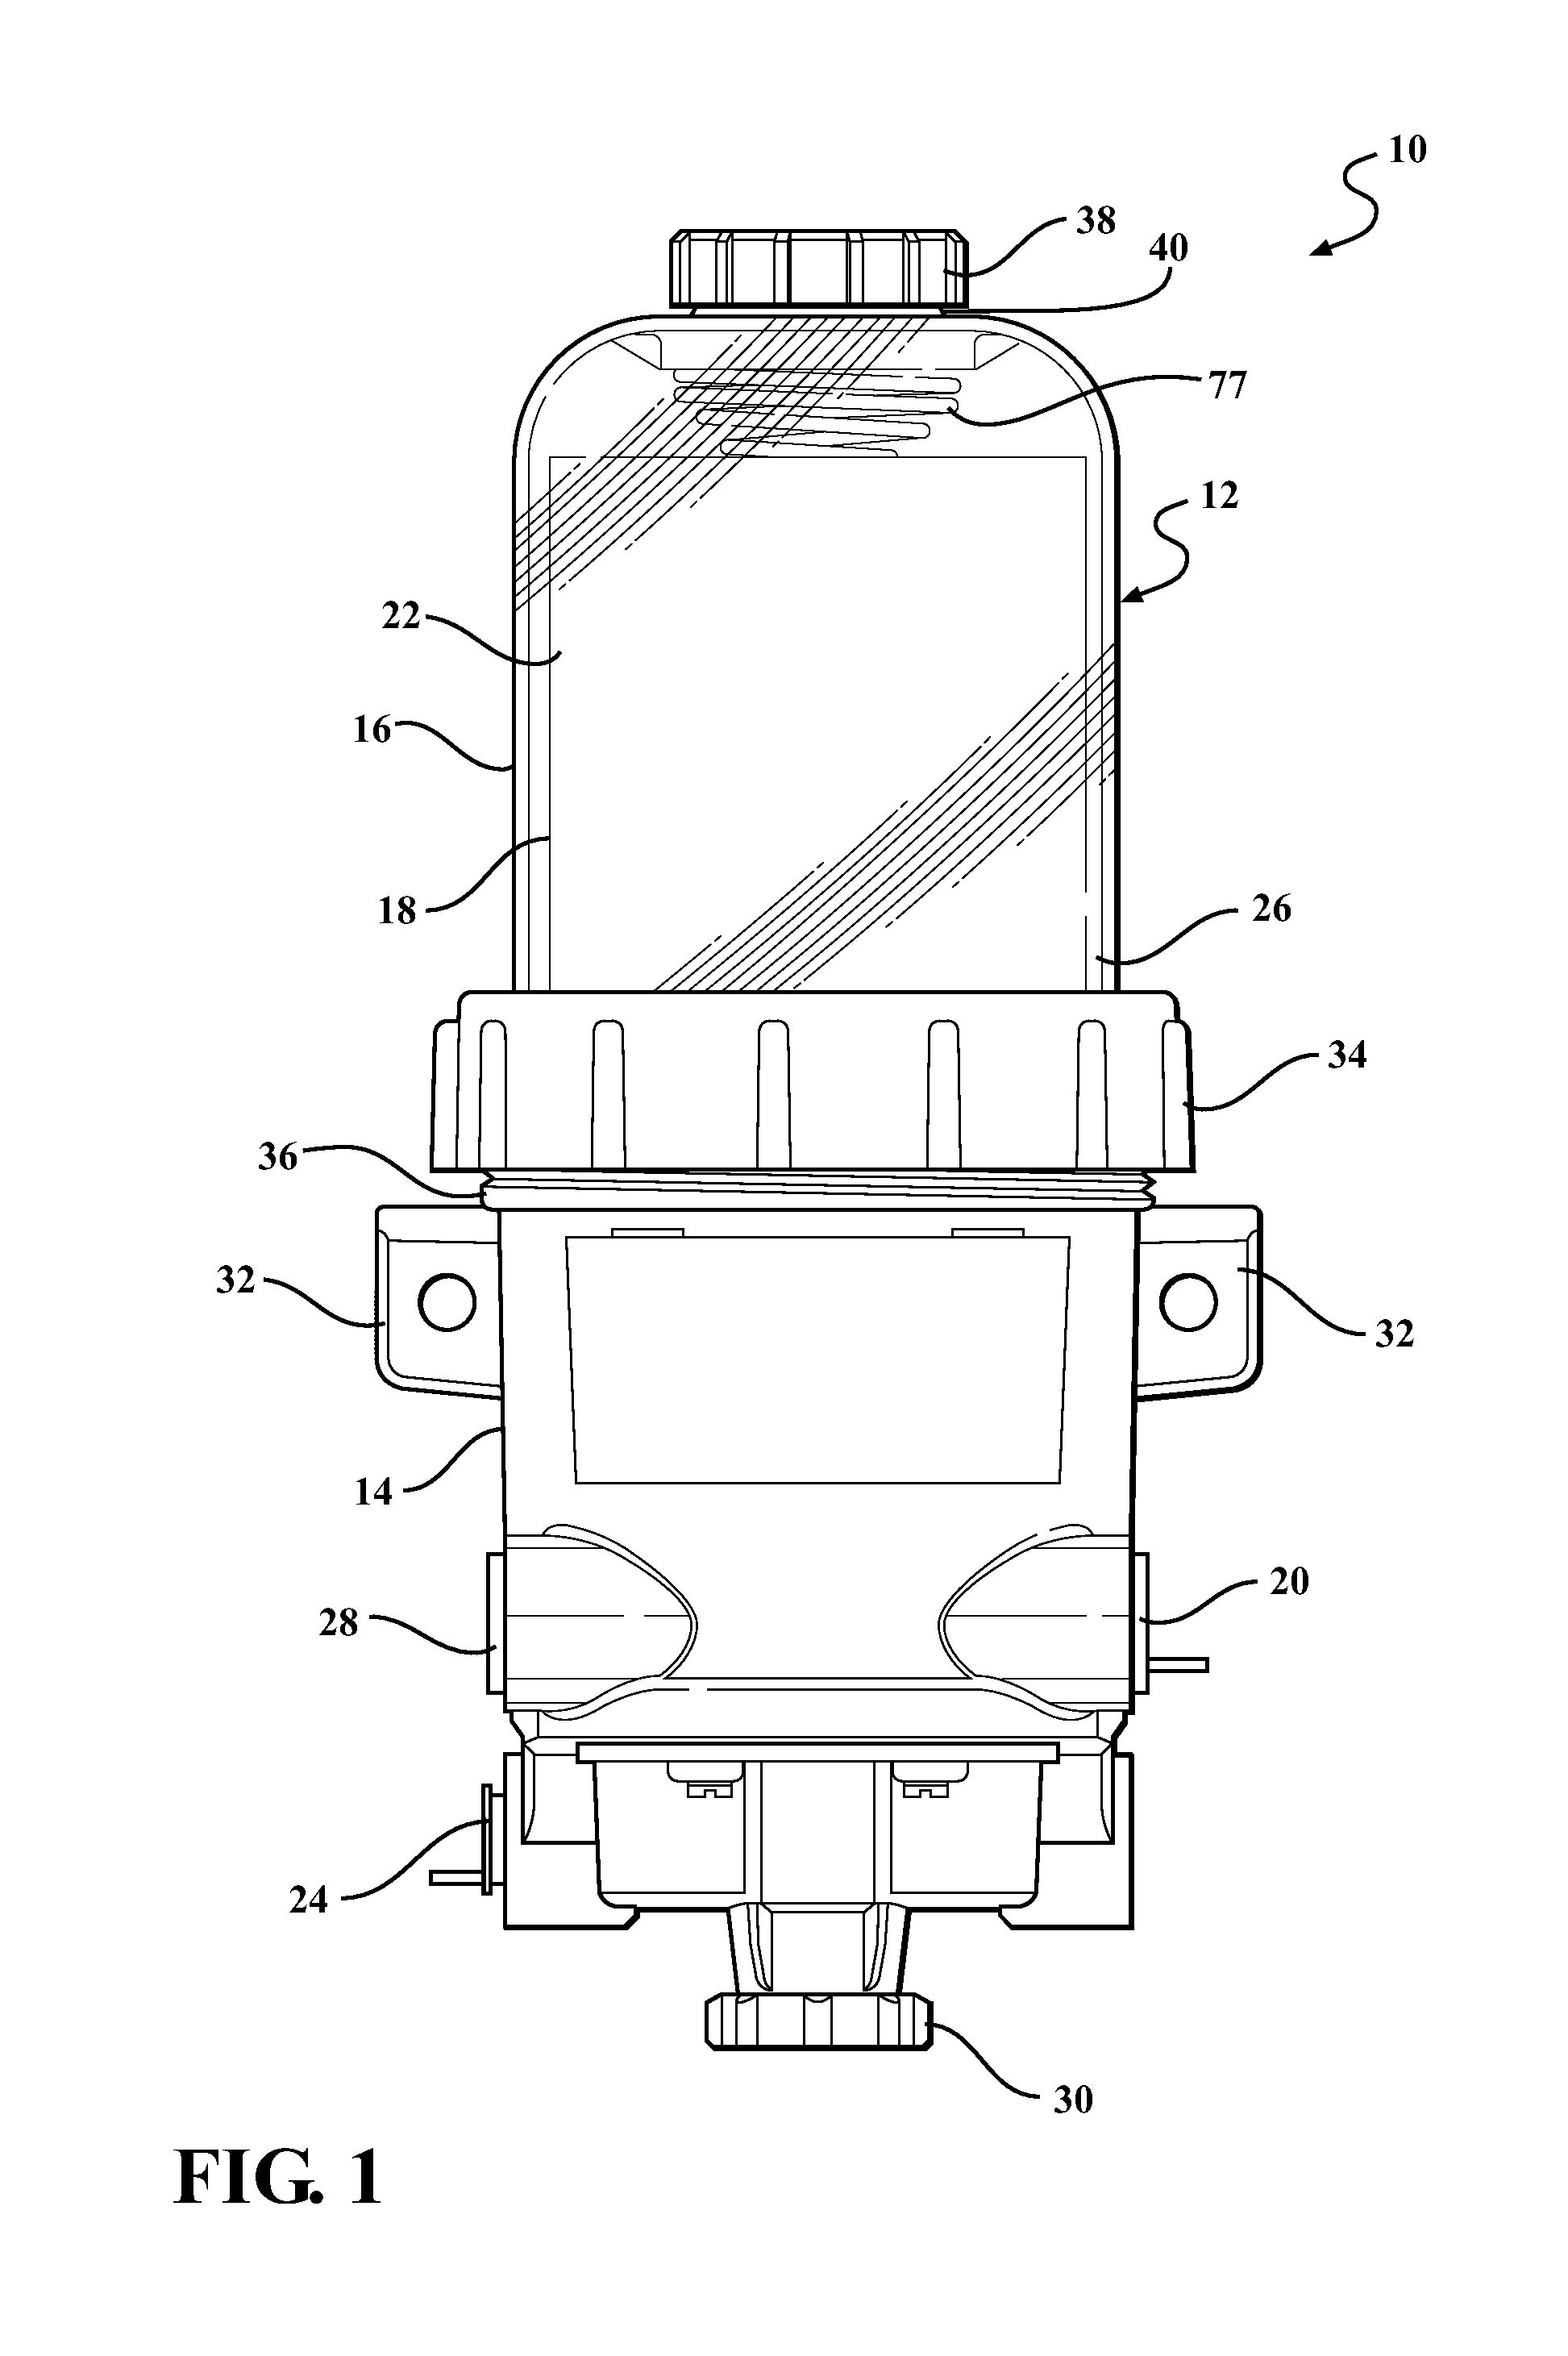 Fluid filter assembly with a filter cartridge and housing interface